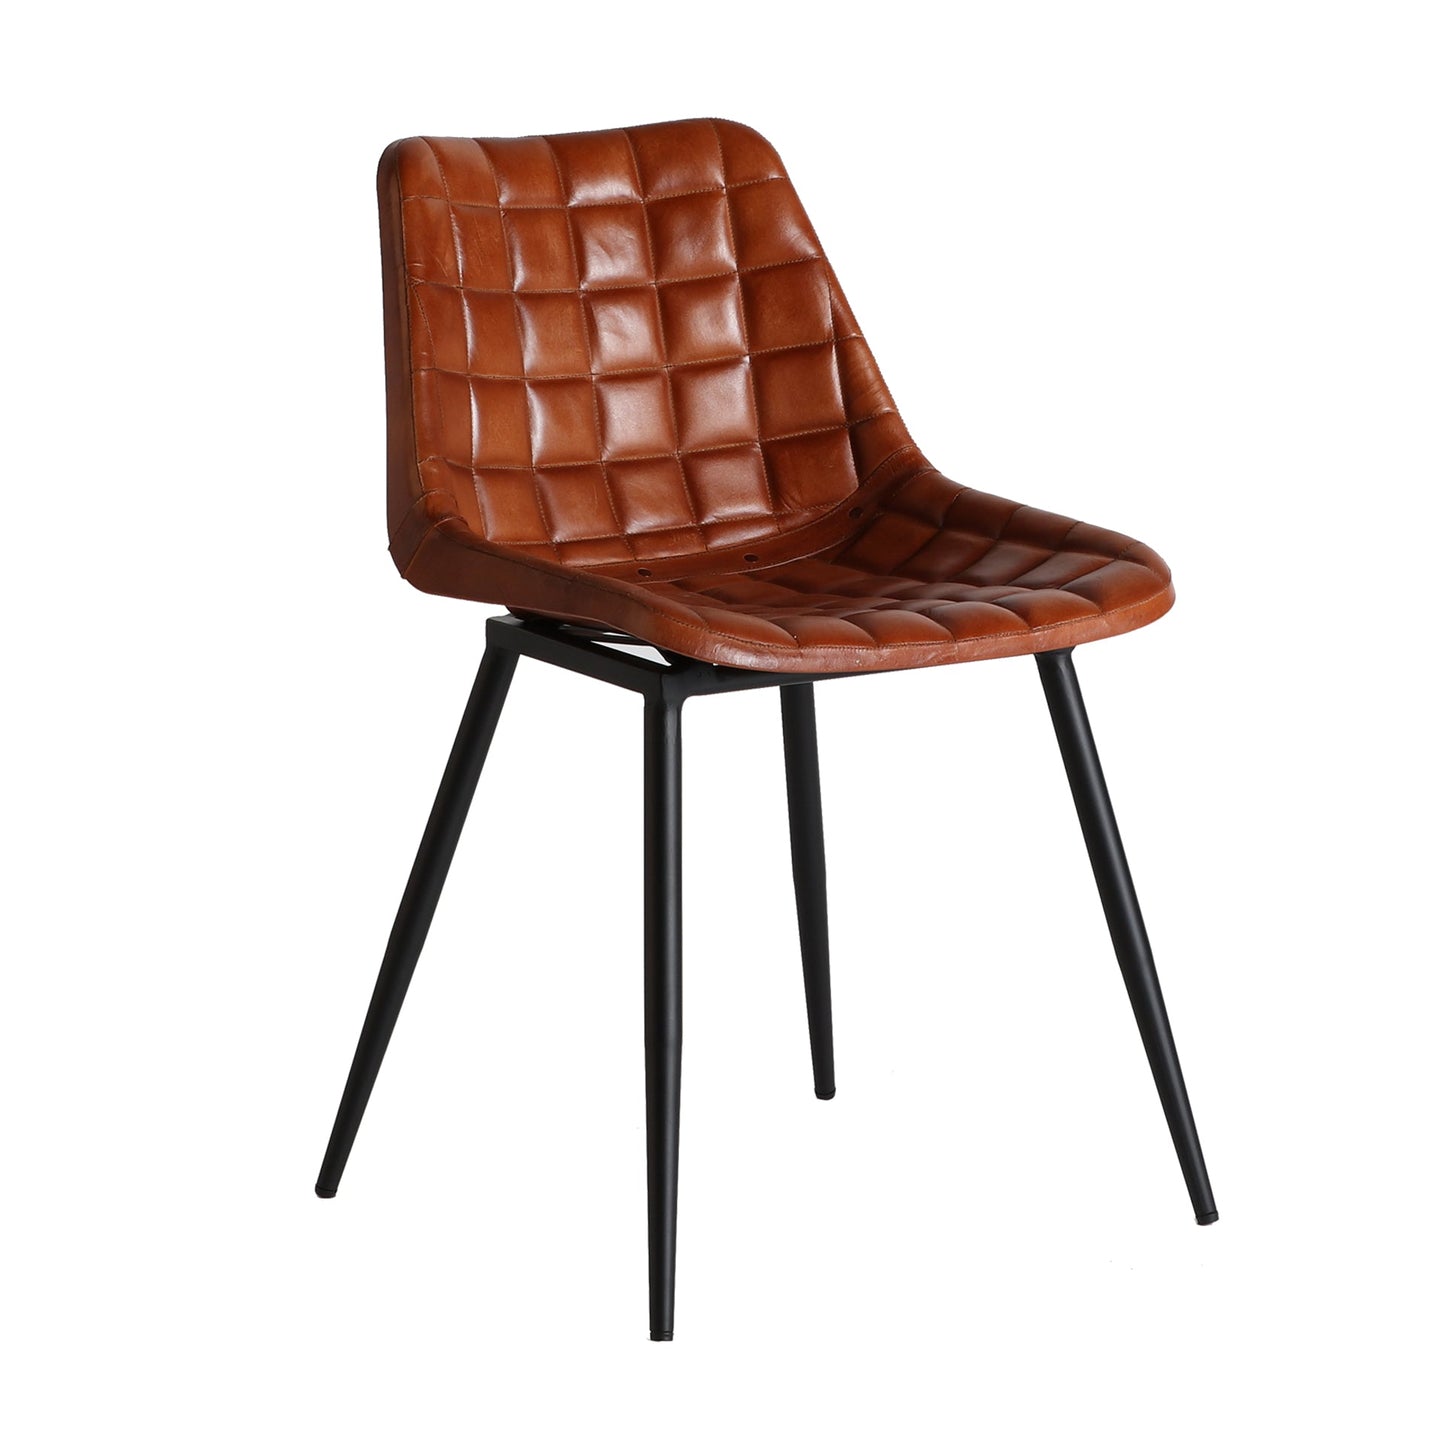 Mold Chair in Brown Colour